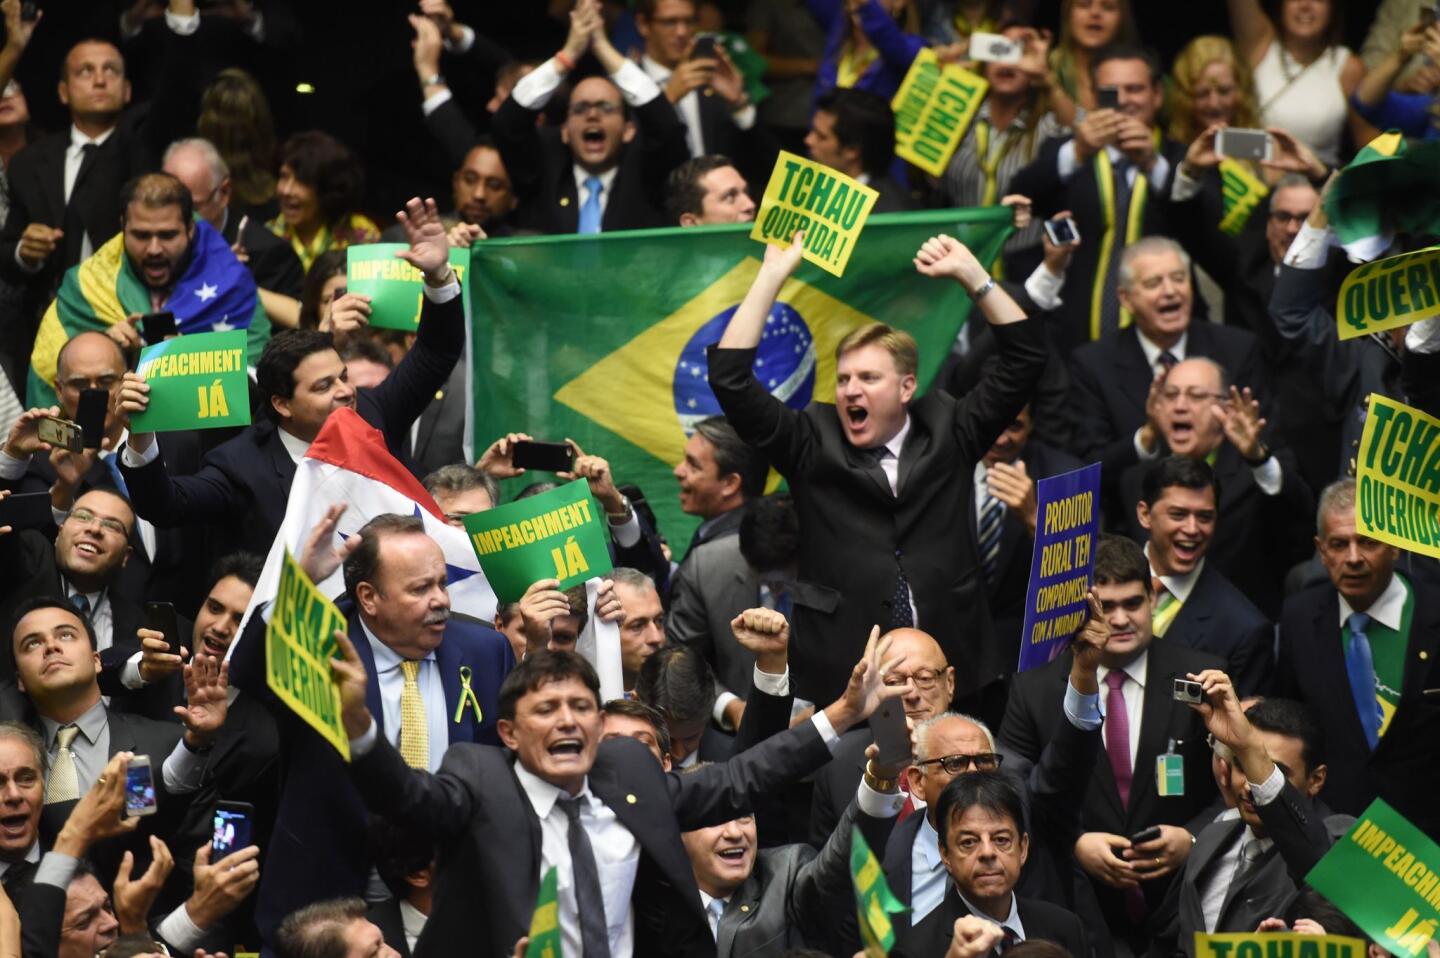 Brazil's lawmakers celebrate after a vote to authorize President Dilma Rousseff's impeachment in Congress in Brasilia.